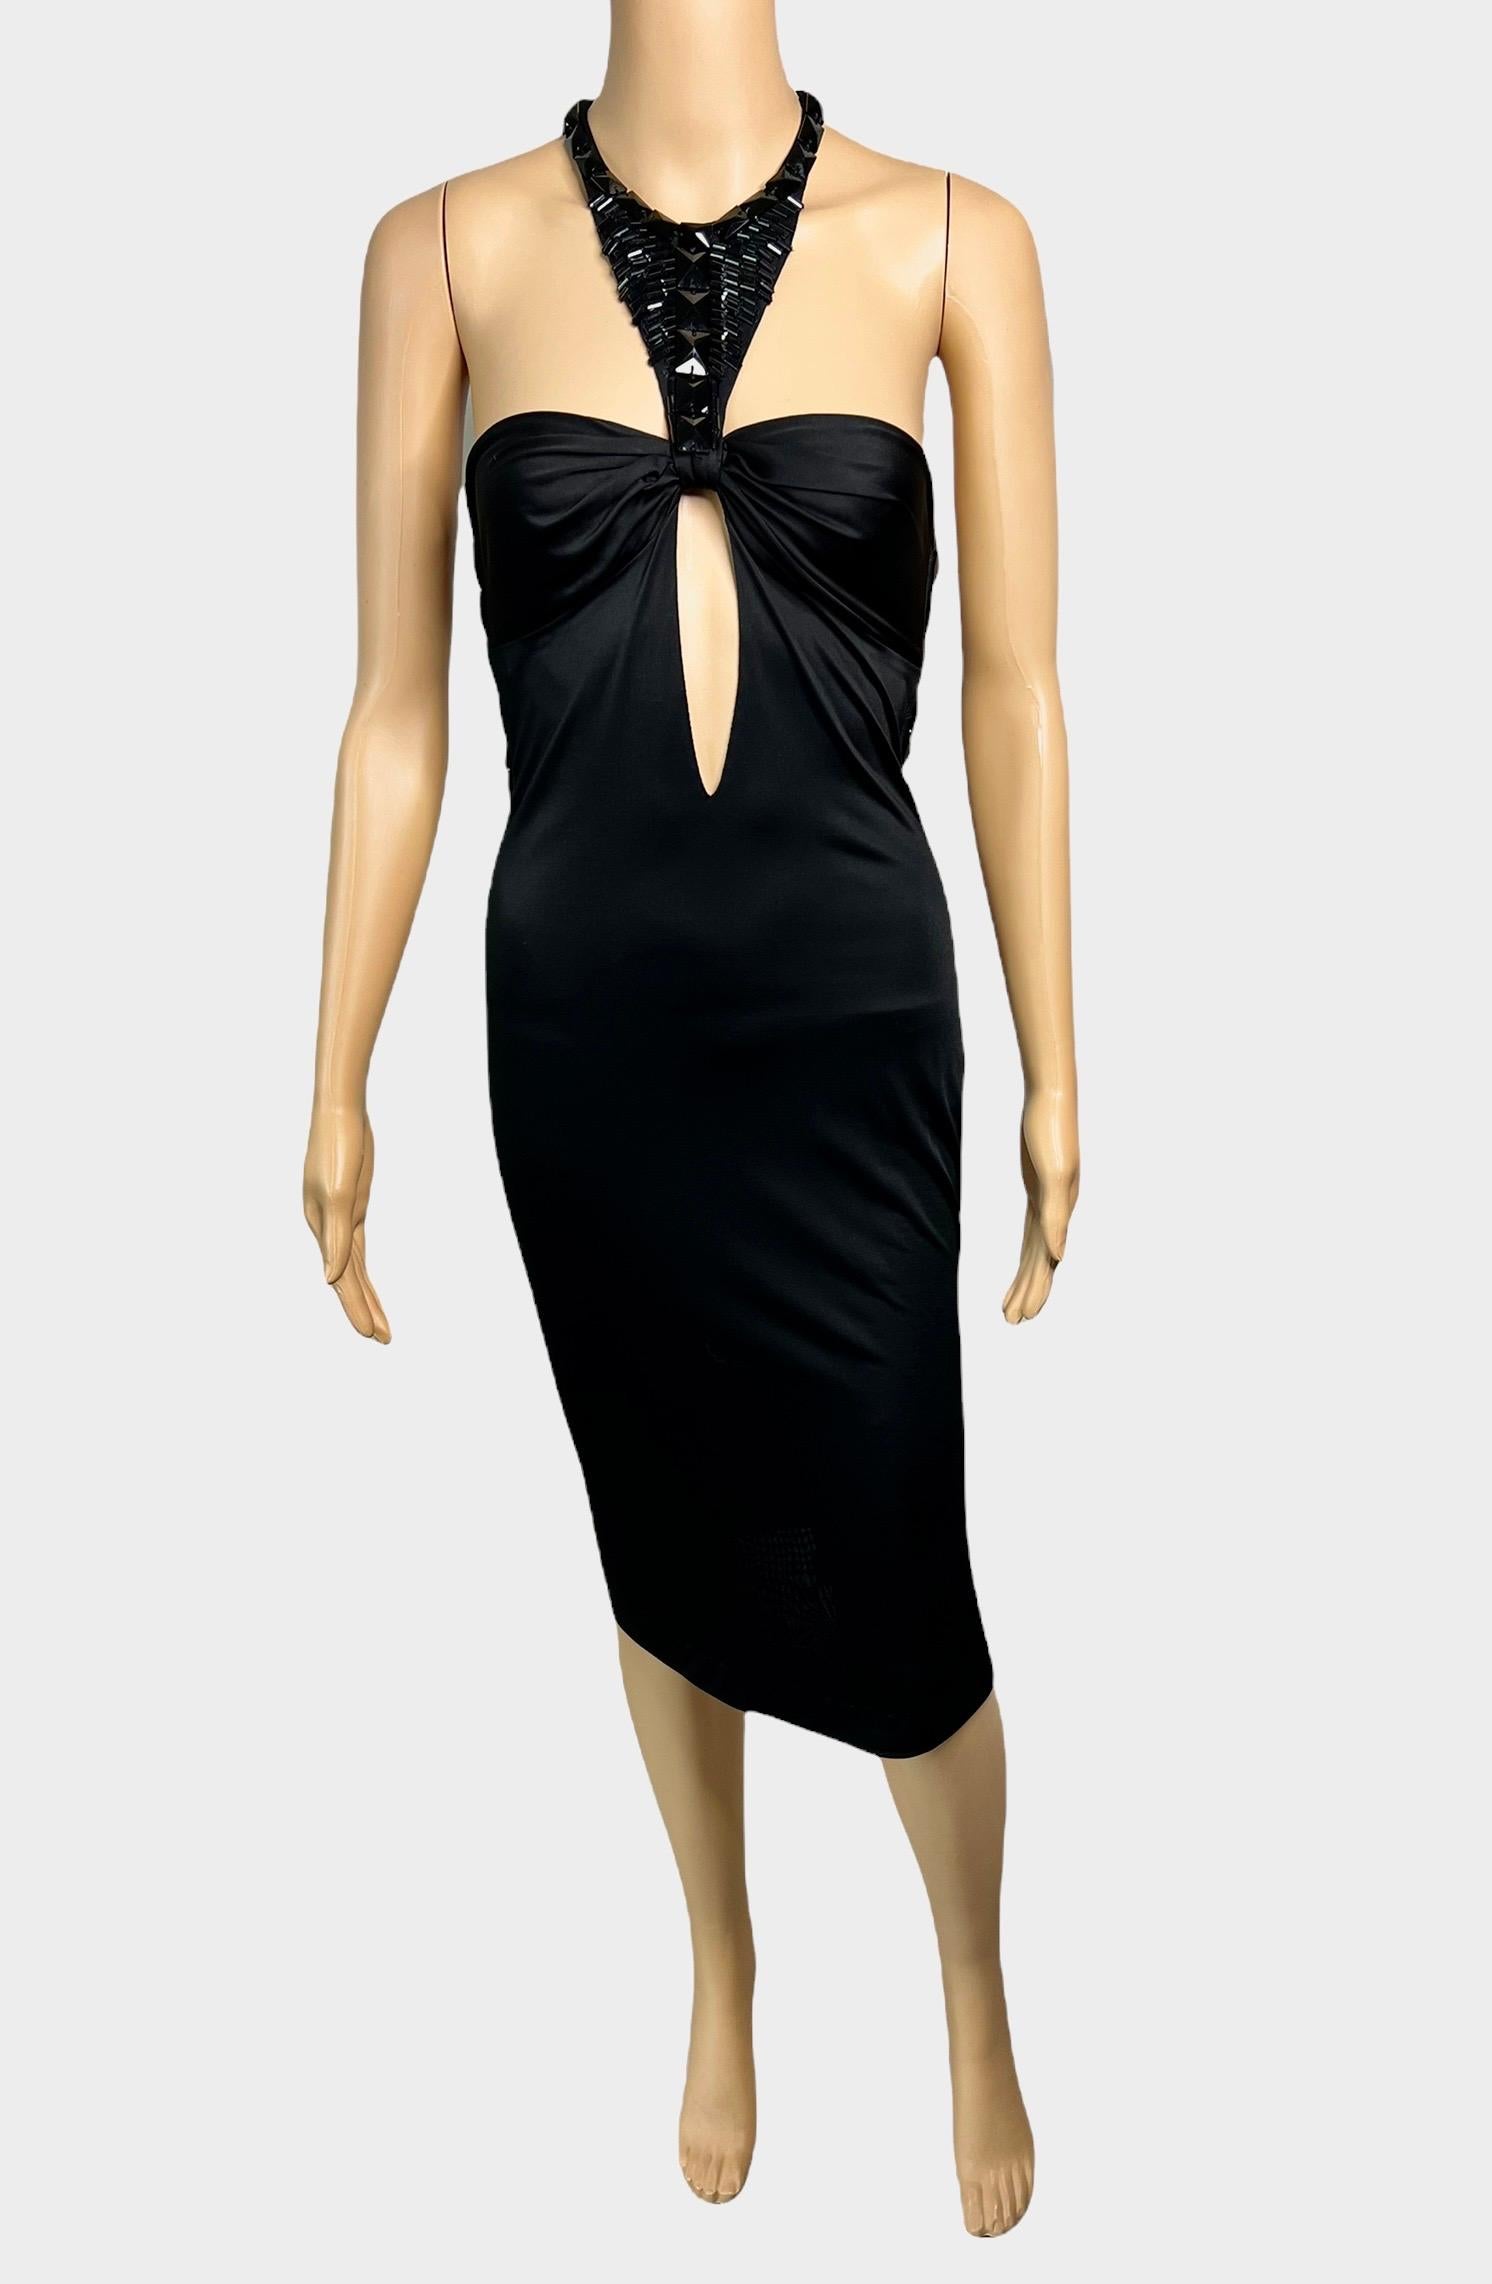 Tom Ford for Gucci F/W 2004 Embellished Plunging Cutout Black Evening Dress IT 42

Gucci evening dress featuring embellished accents at neckline and cutouts at front and back. 


